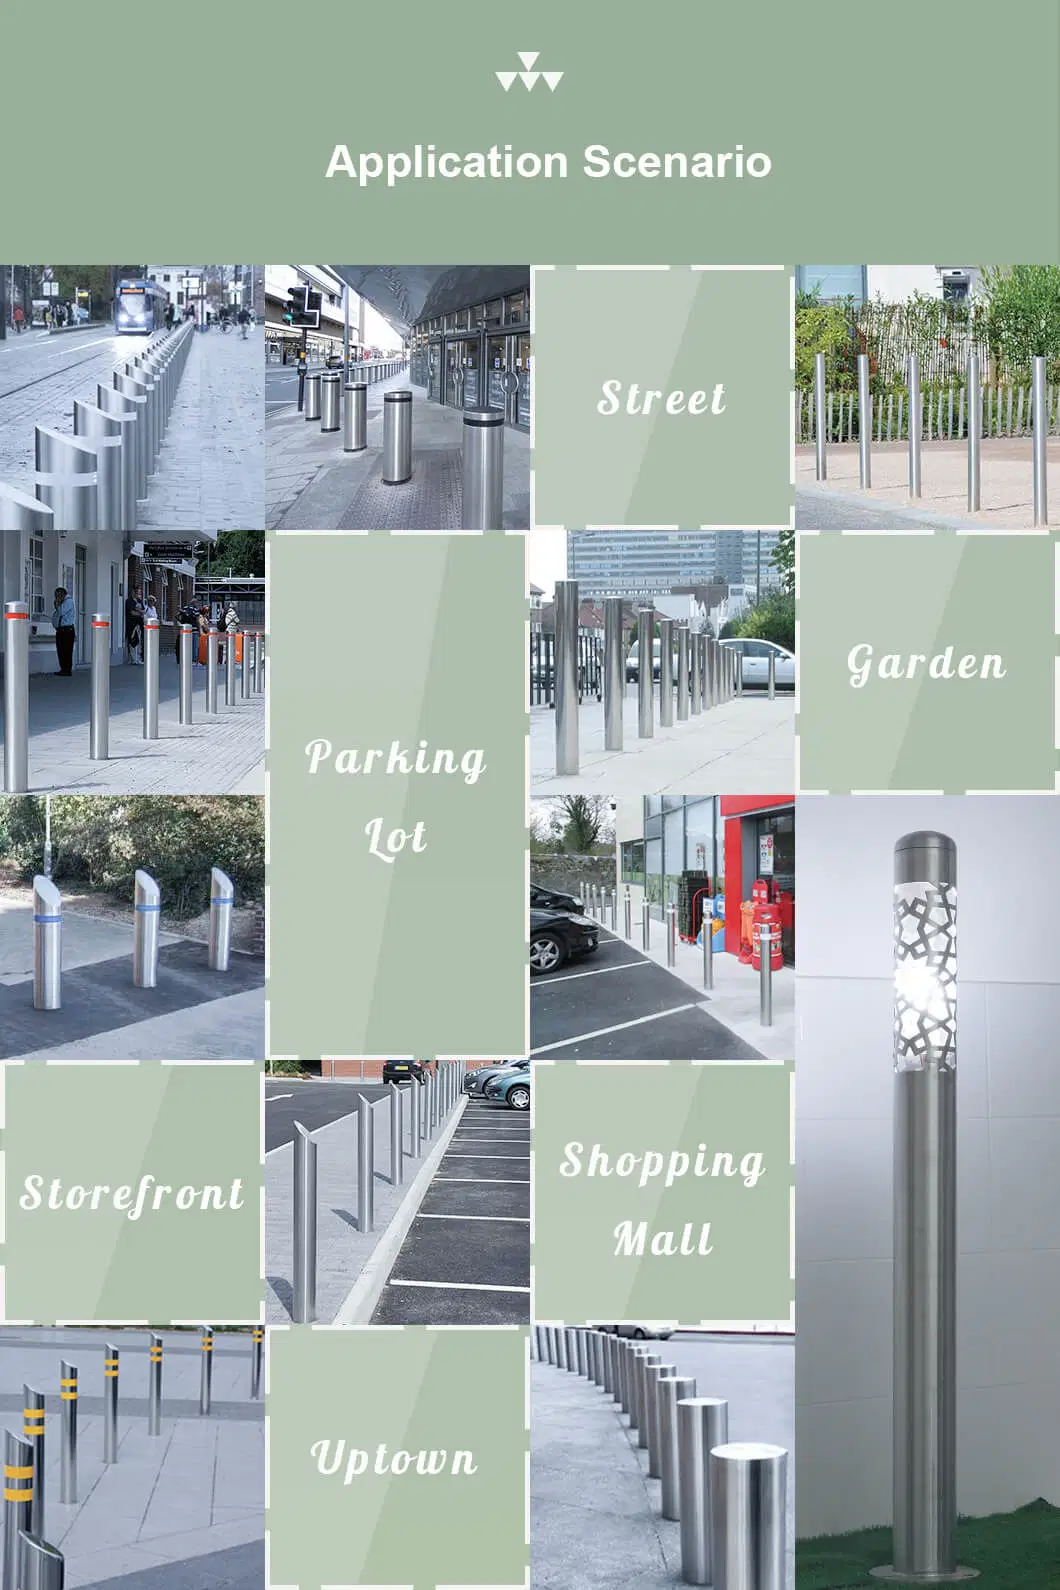 600mm Easy Mounting Stainless Steel Access Control Bollard